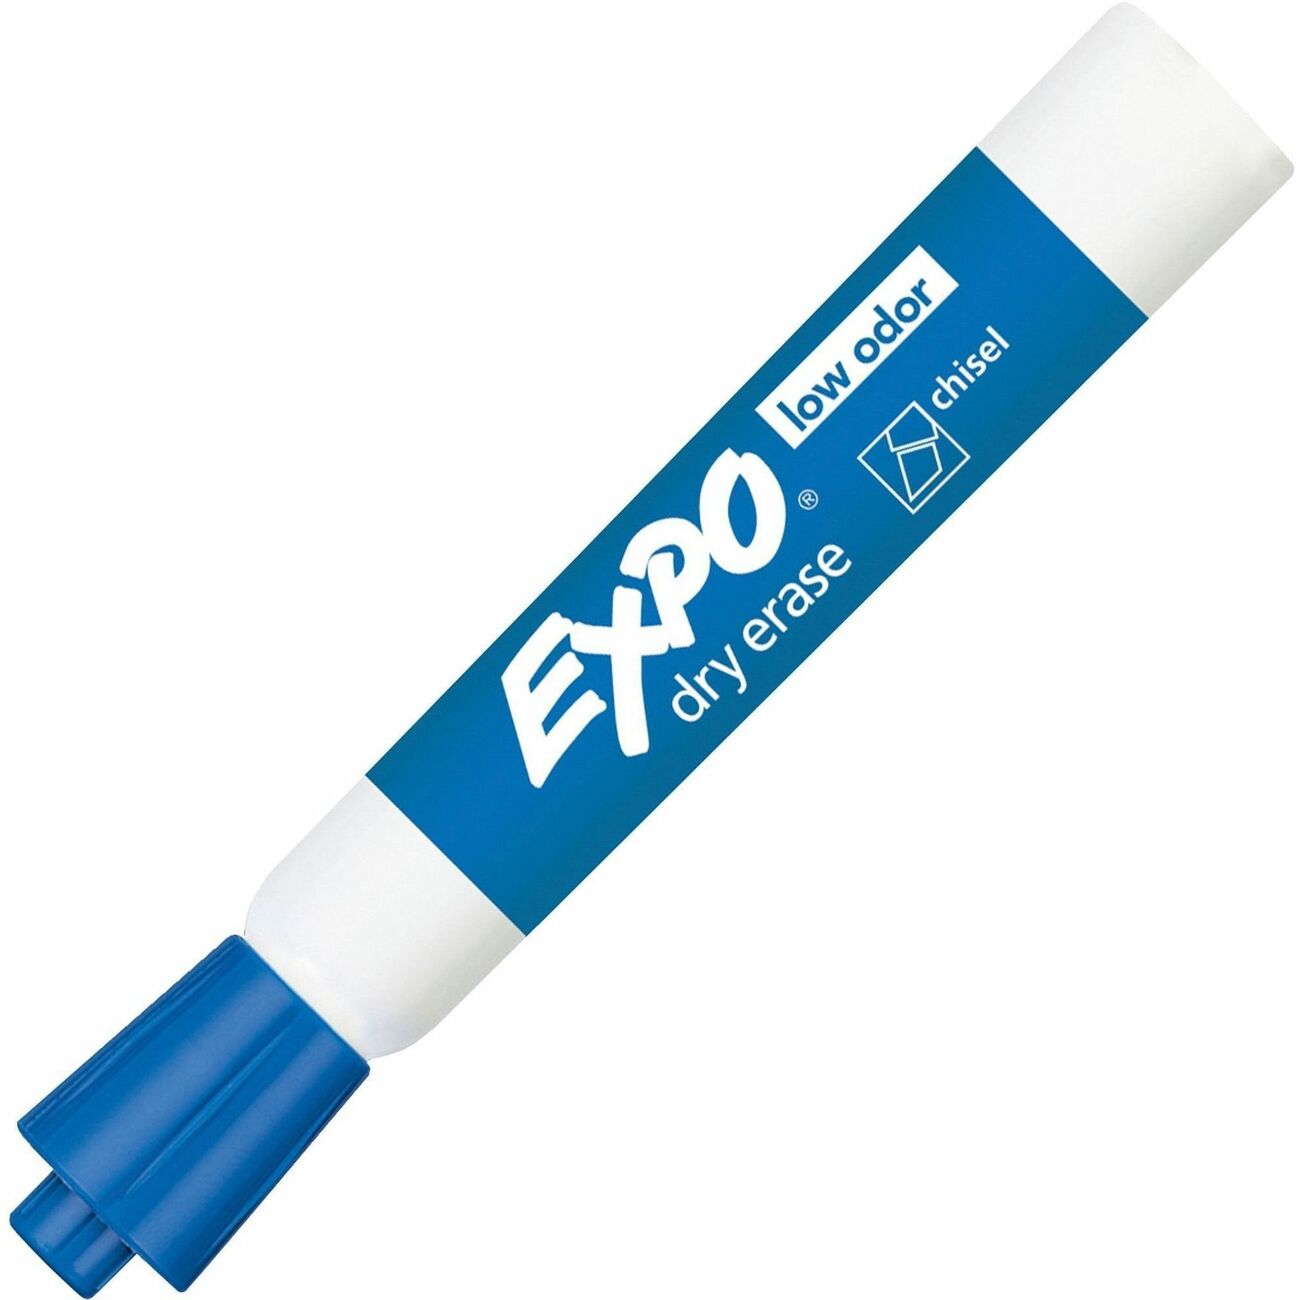 Expo Chisel Tip Dry Erase Whiteboard Markers